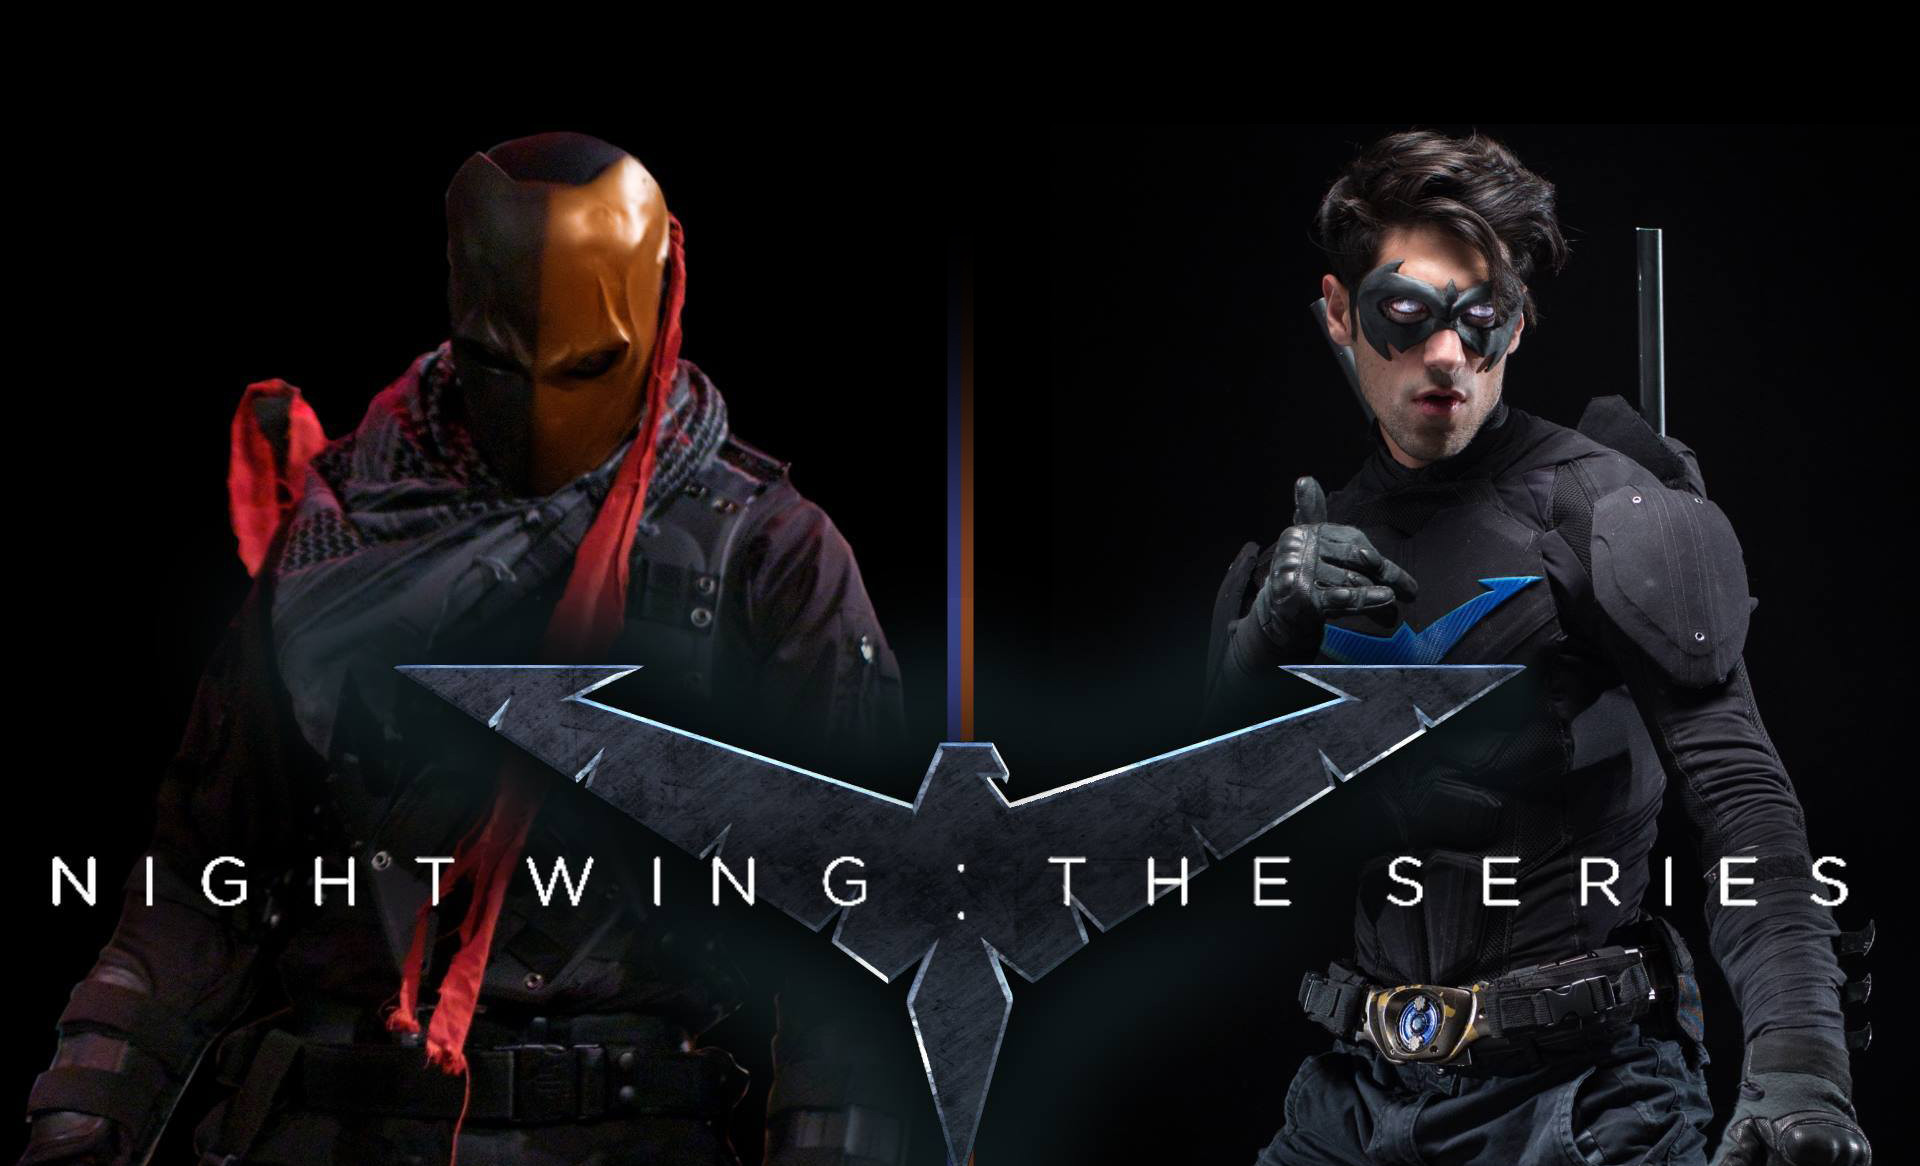 1920x1166 wallpaper.wiki-Nightwing-The-Series-Pictures-PIC-WPE002301